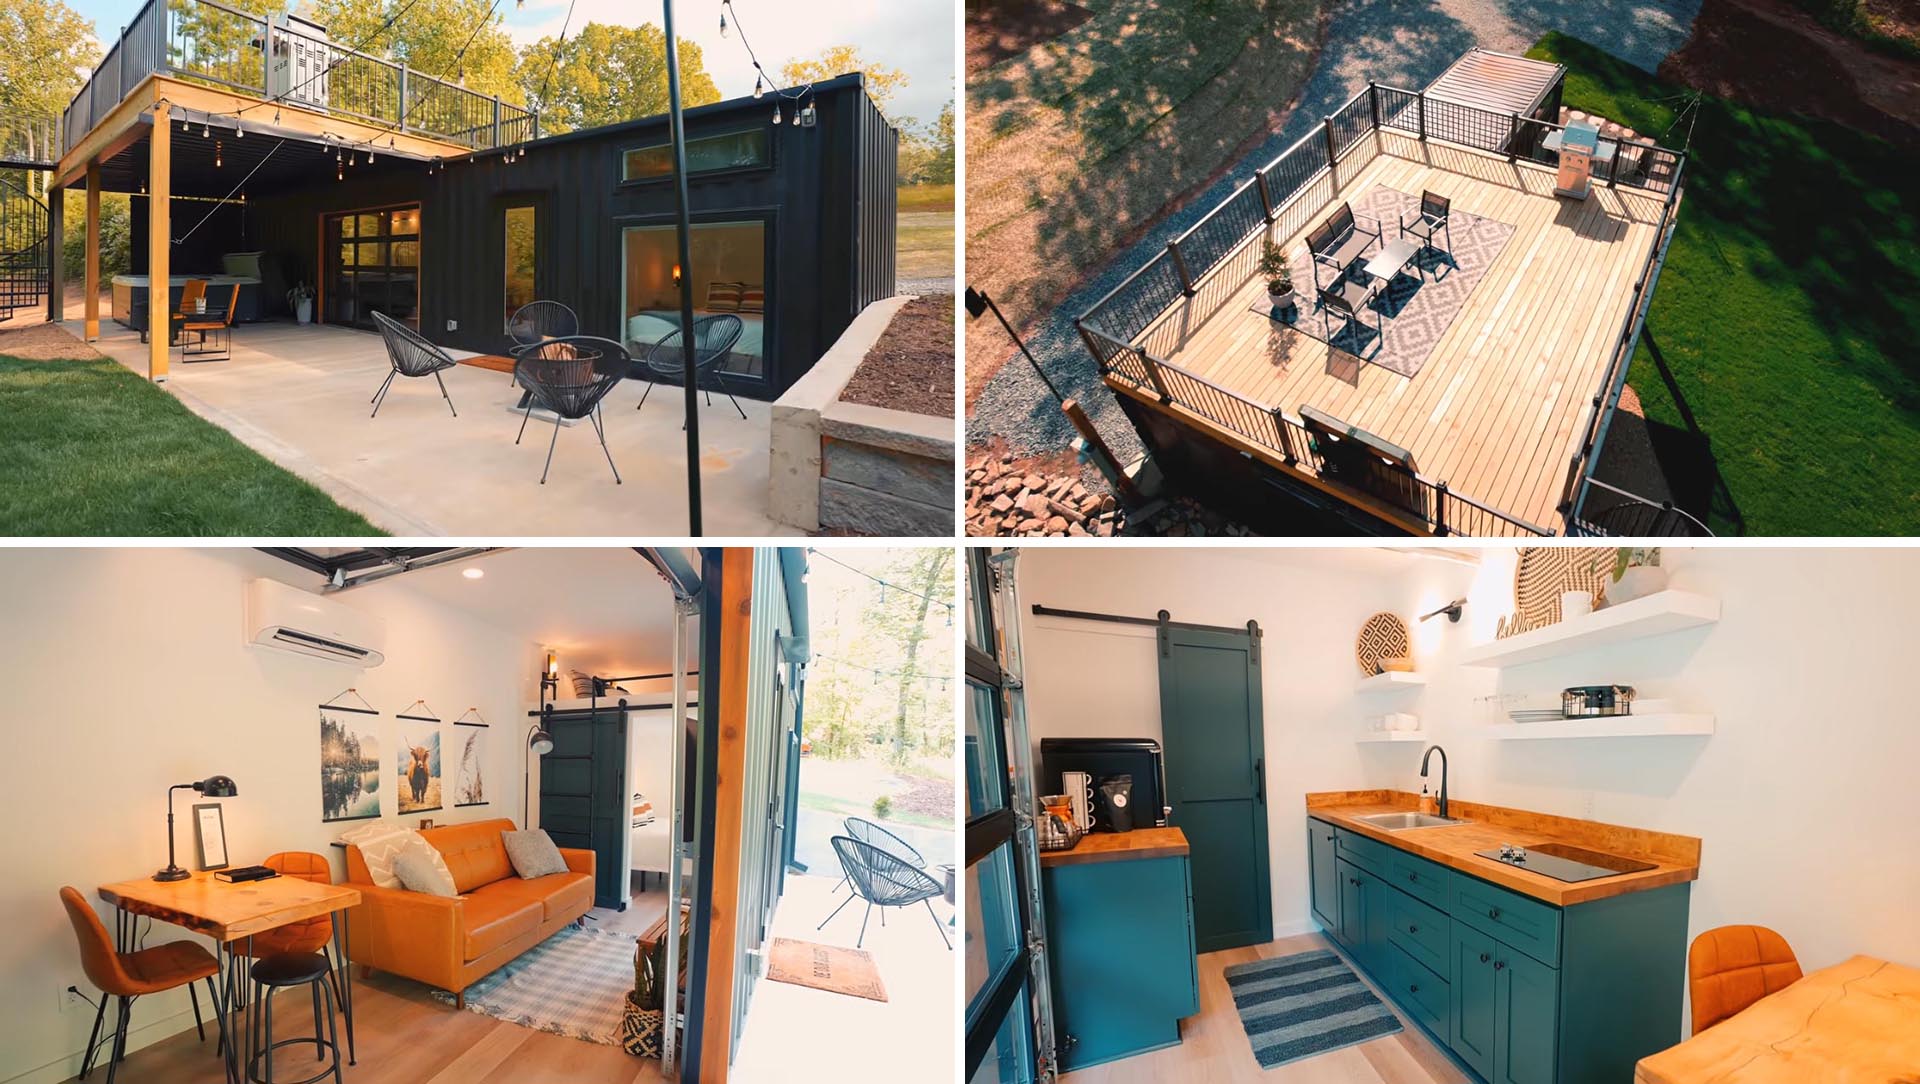 A shipping container tiny home with a black exterior, rooftop deck, outdoor entertaining space, and a modern interior.